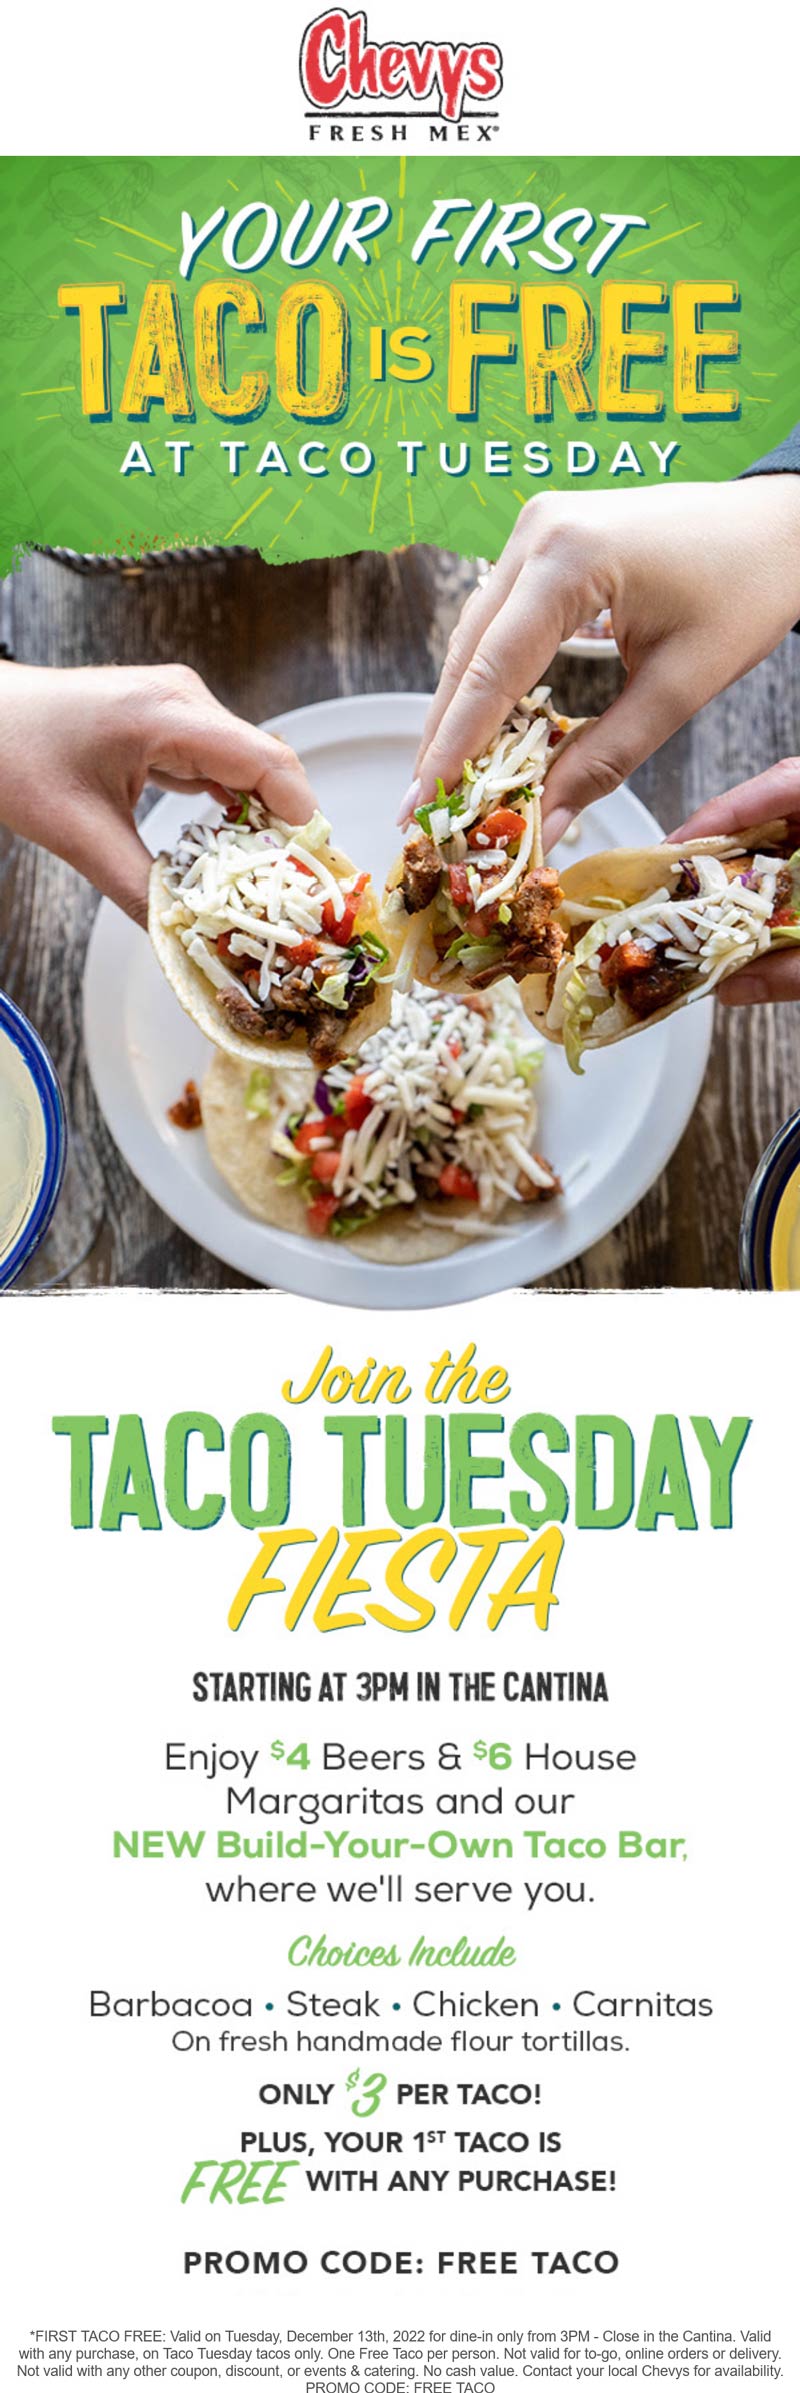 Chevys restaurants Coupon  First taco free today at Chevys Fresh Mex #chevys 